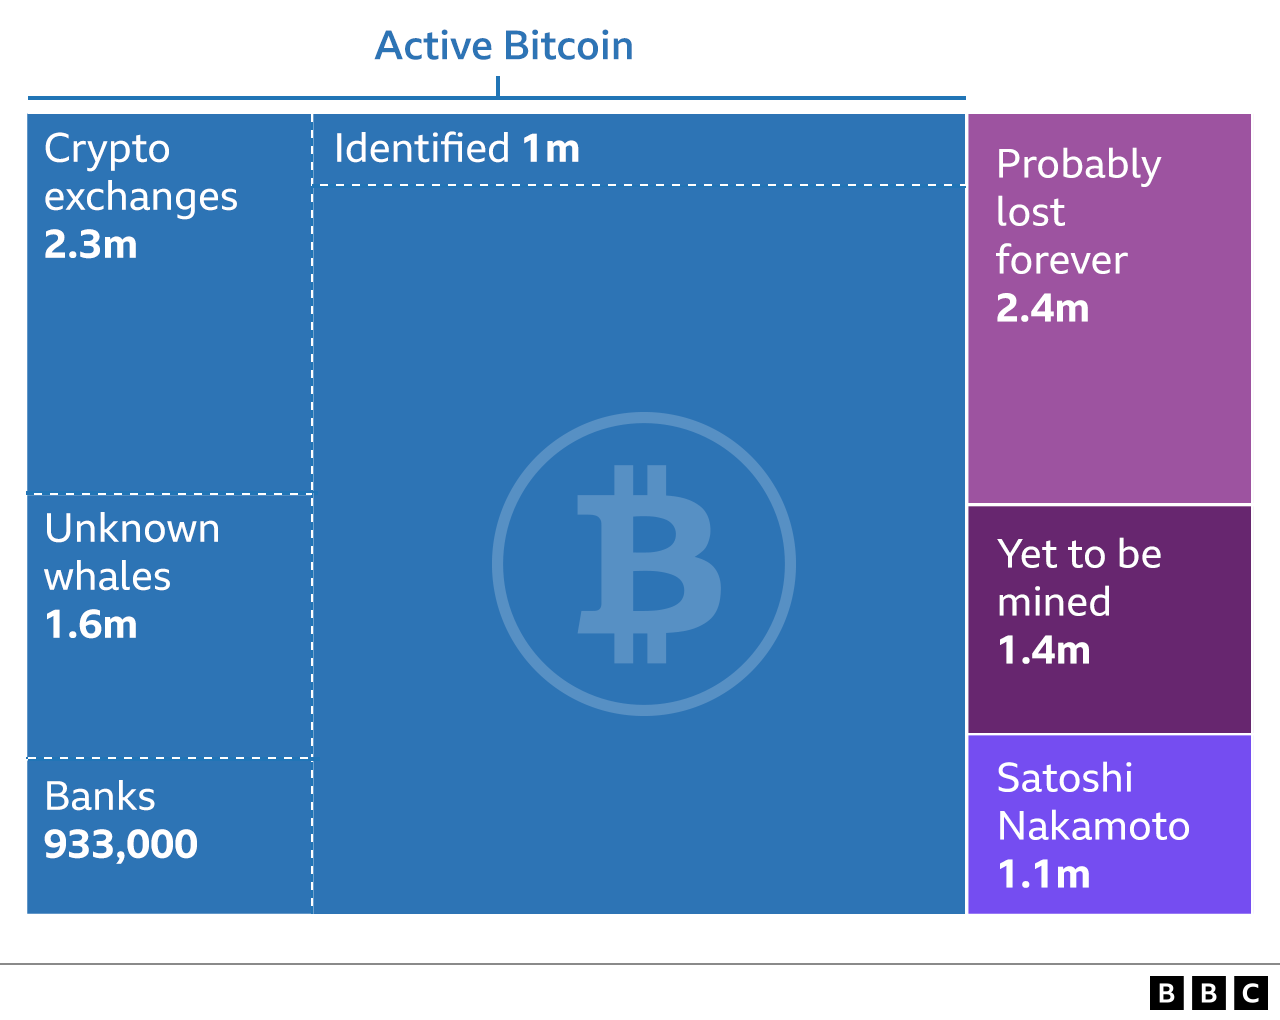 The total amount of Bitcoin which will ever be available is 21 million. There is 1.4 million still to be mined and, of the 19.6 million has mined, 2.4 million has since been 'lost'.